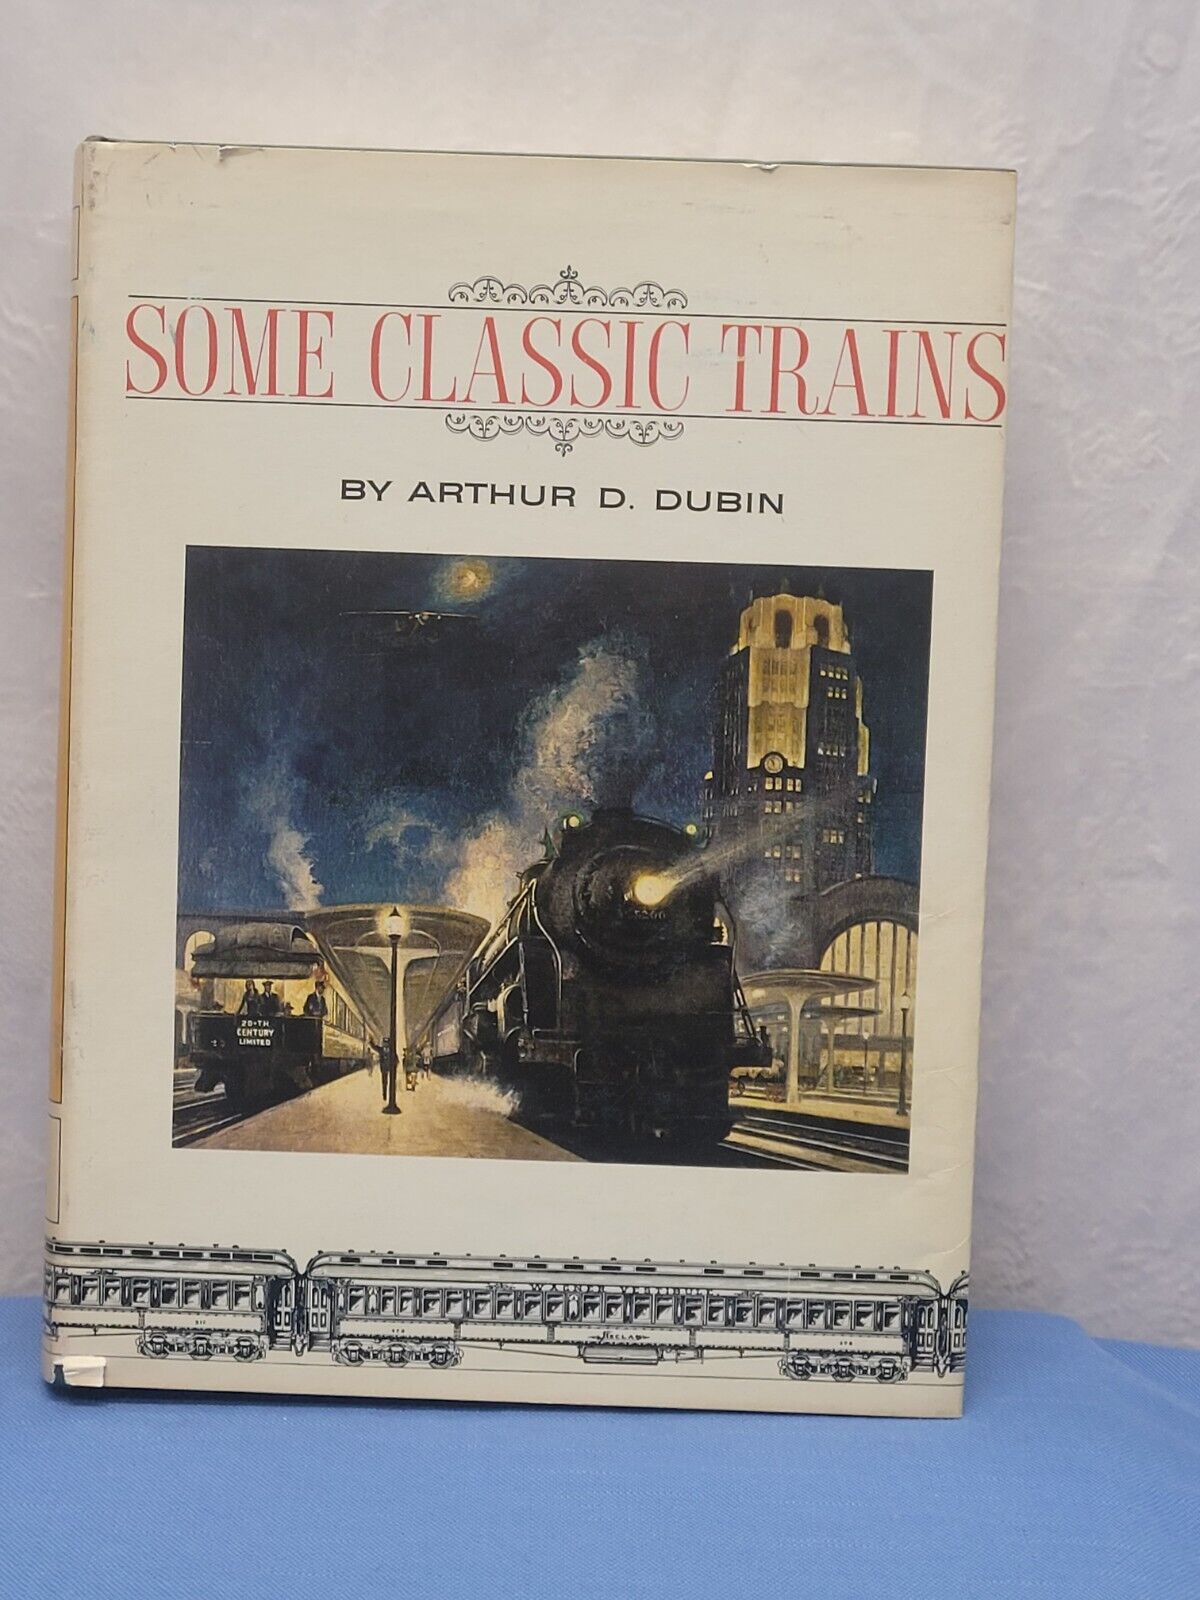 SOME CLASSIC TRAINS By Arthur D. Dubin - Hardcover-1976